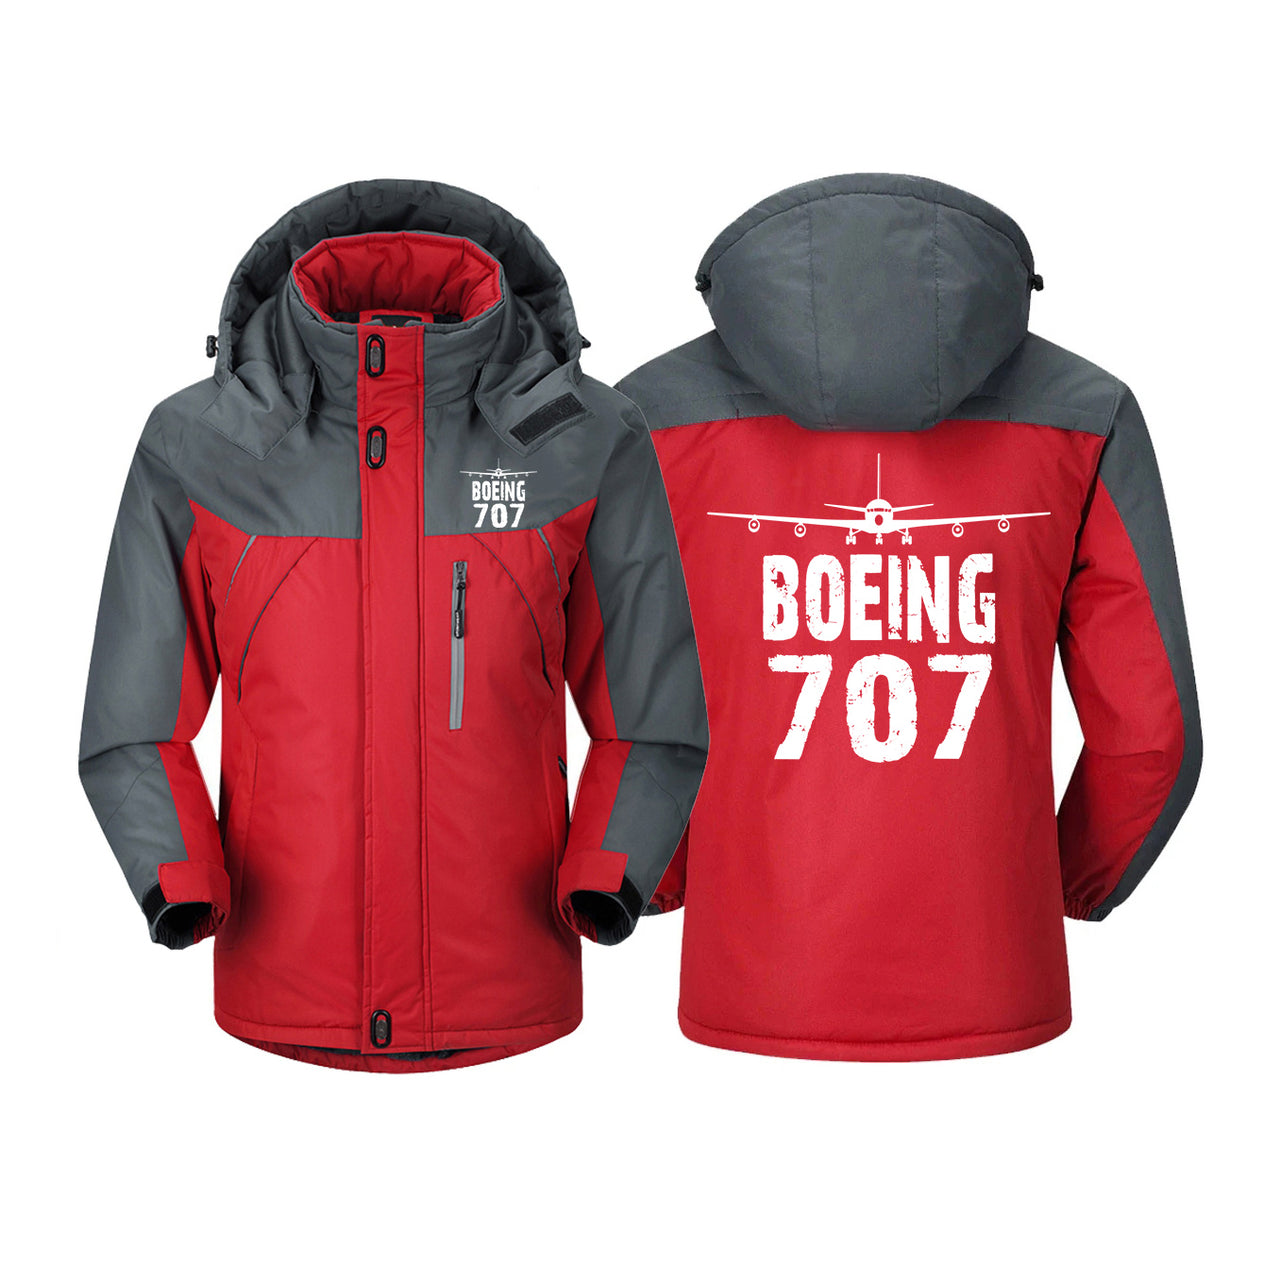 Boeing 707 & Plane Designed Thick Winter Jackets